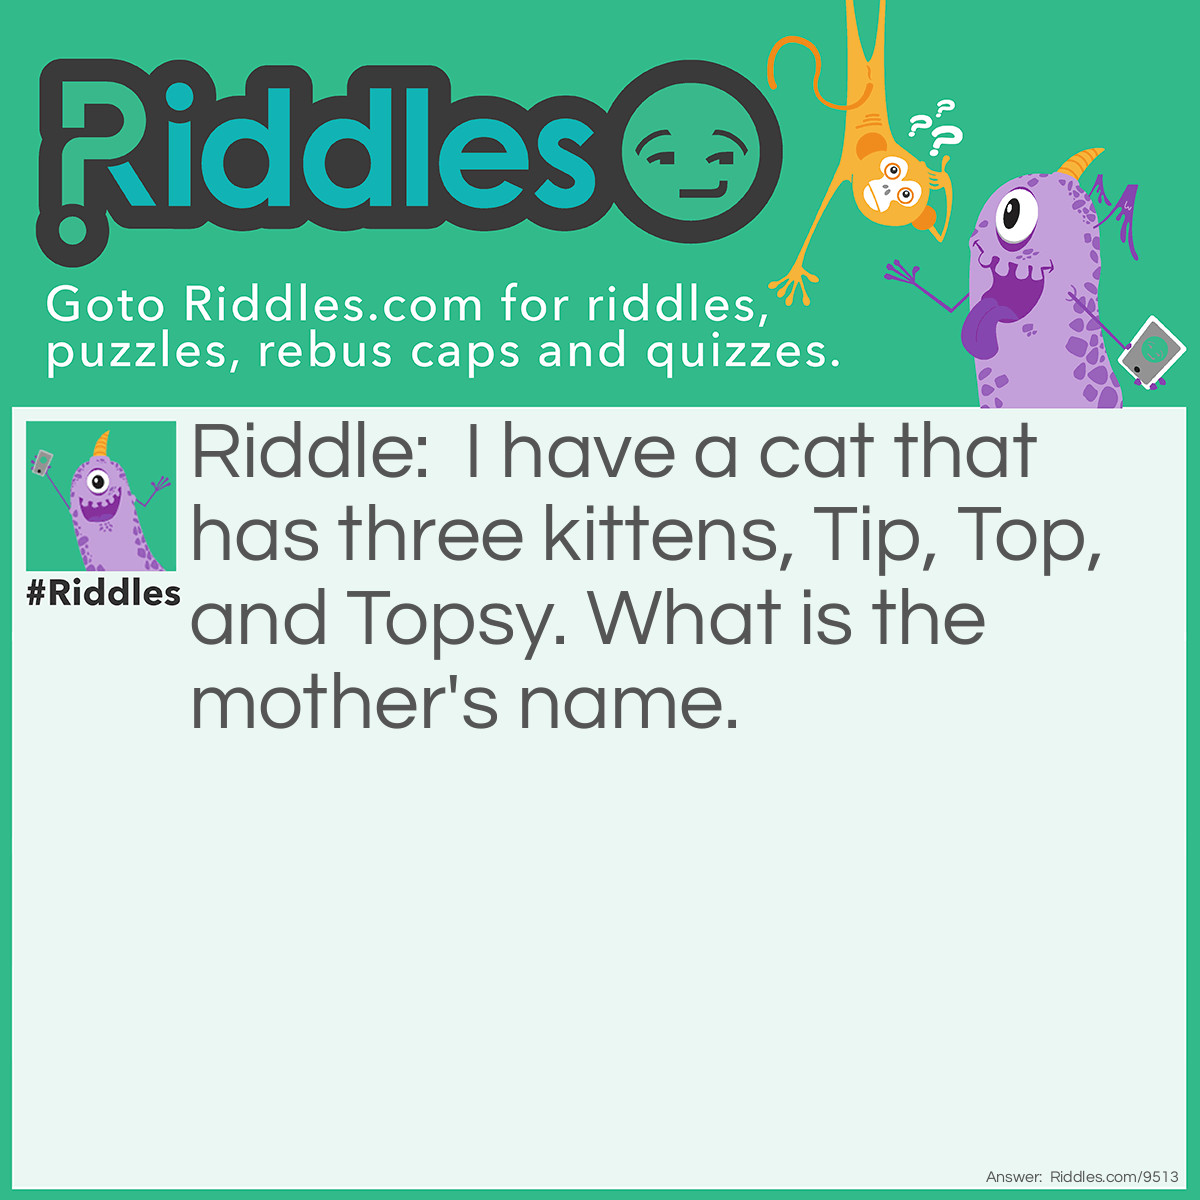 Riddle: I have a cat that has three kittens, Tip, Top, and Topsy. What is the mother's name. Answer: There is no question mark at the end of the "question", so the answer is What.